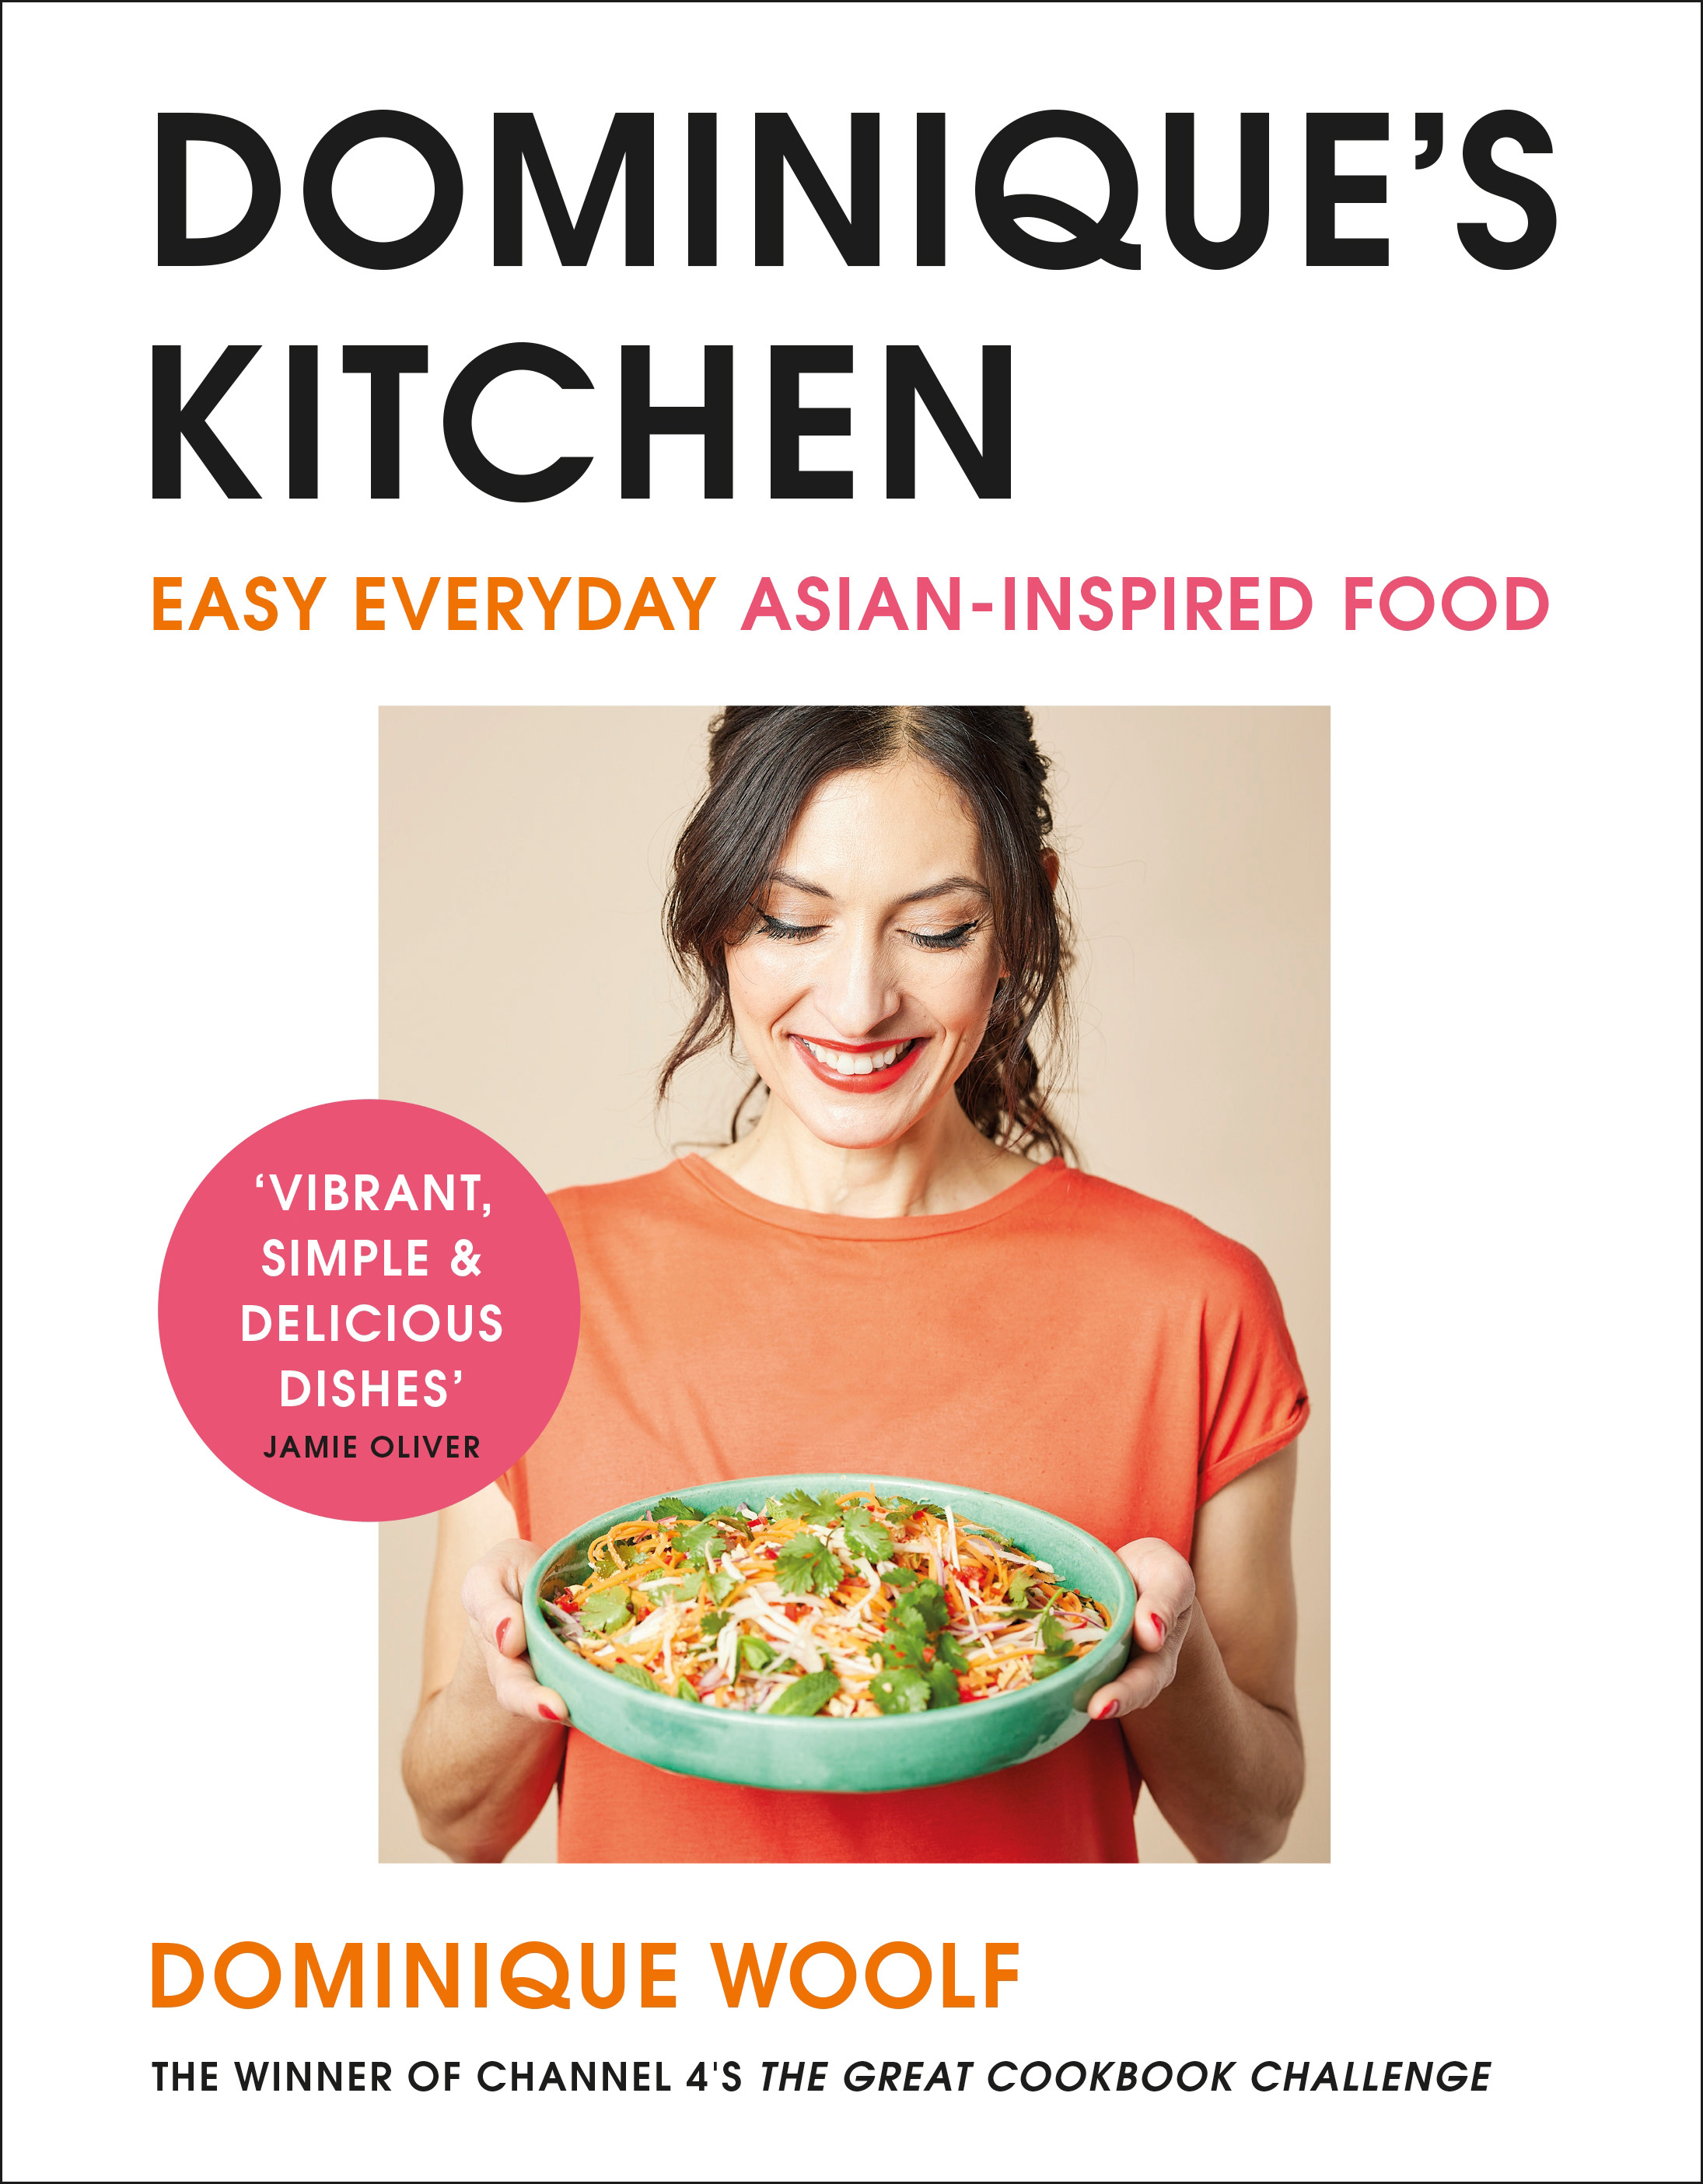 Dominique's Kitchen : Easy everyday Asian-inspired food from the winner of Channel 4's The Great Cookb ook Challenge | Cookbook